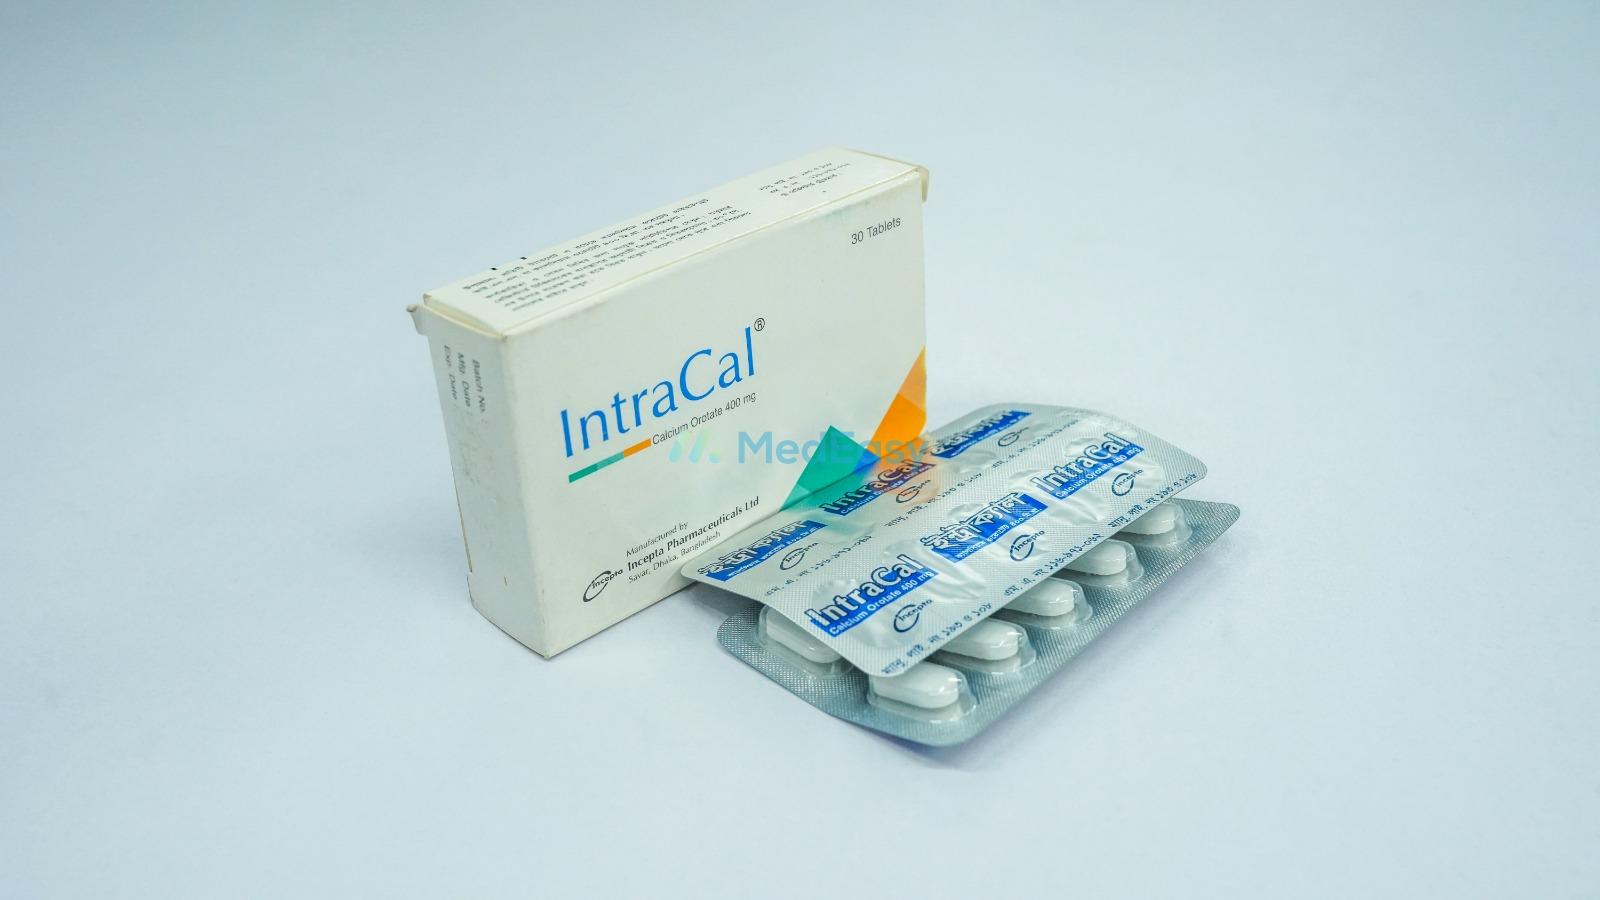 IntraCal